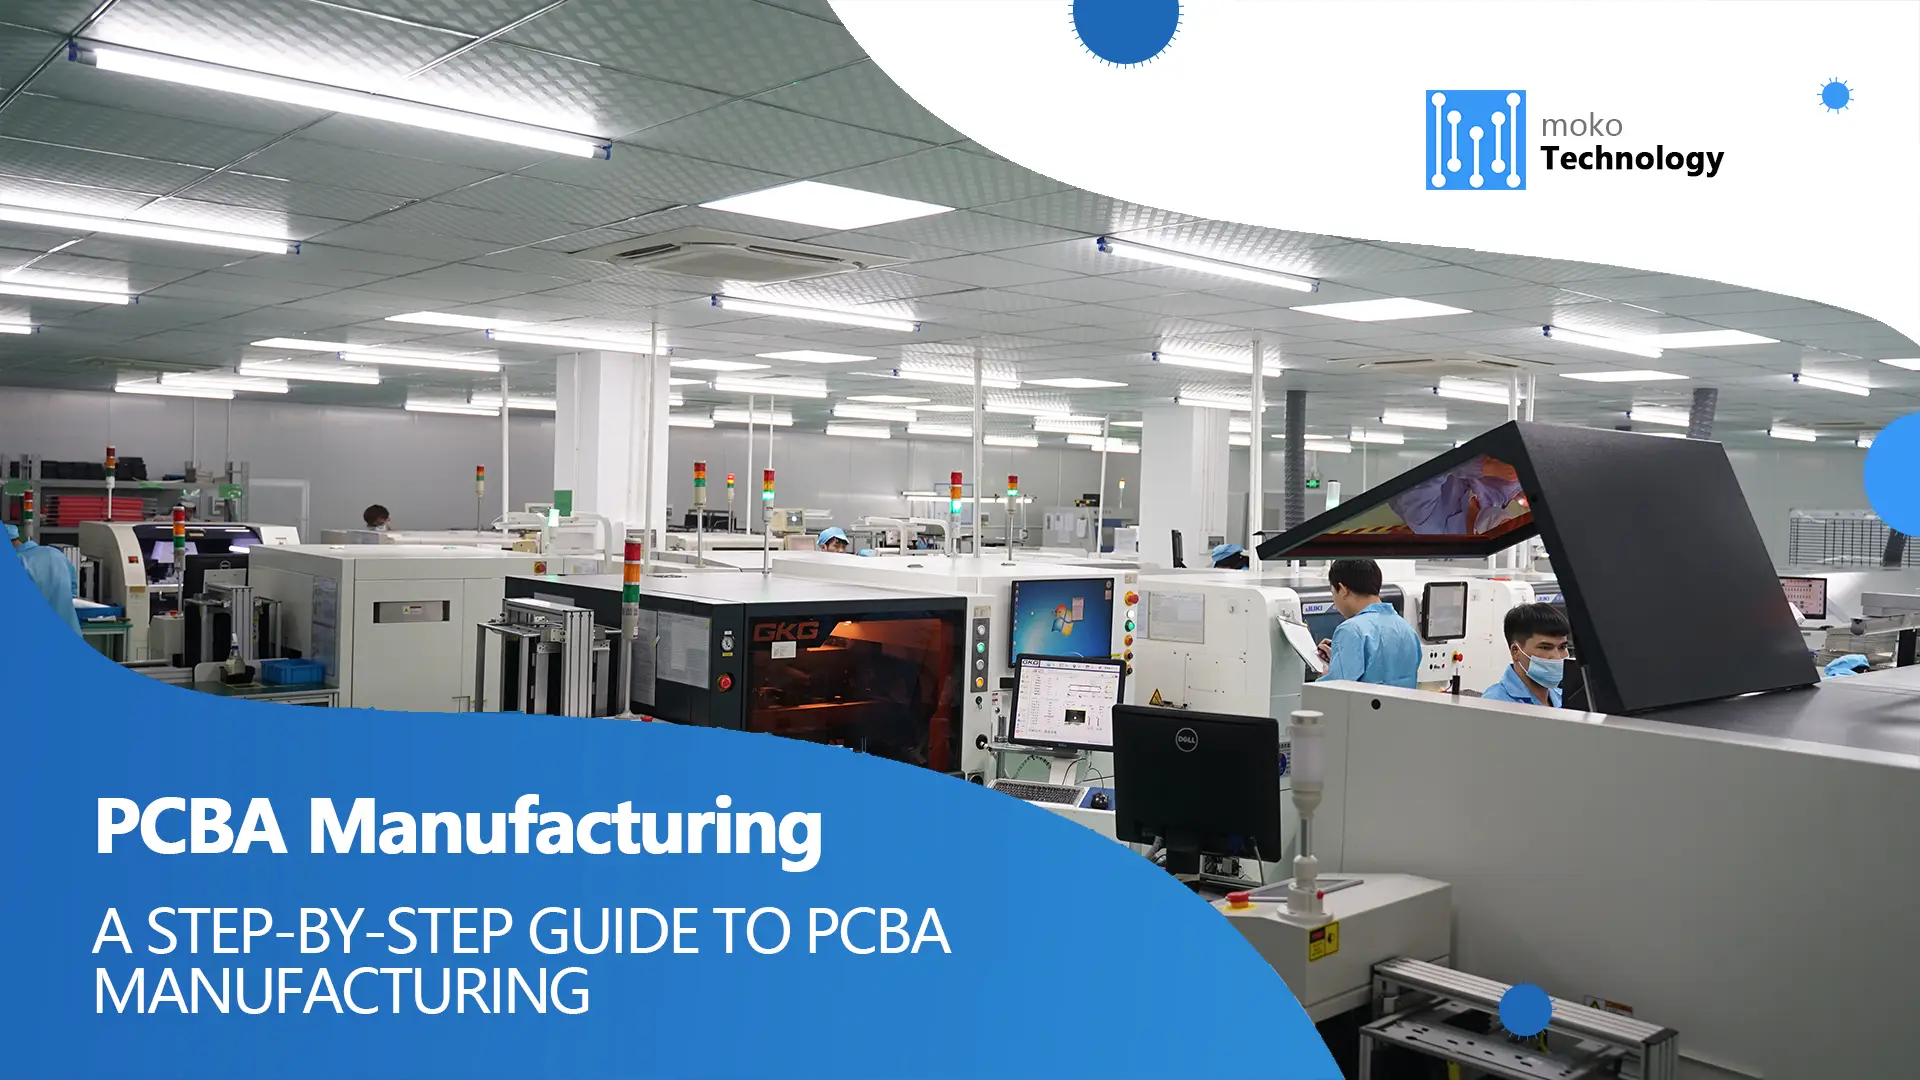 A Step-by-Step Guide to PCBA Manufacturing